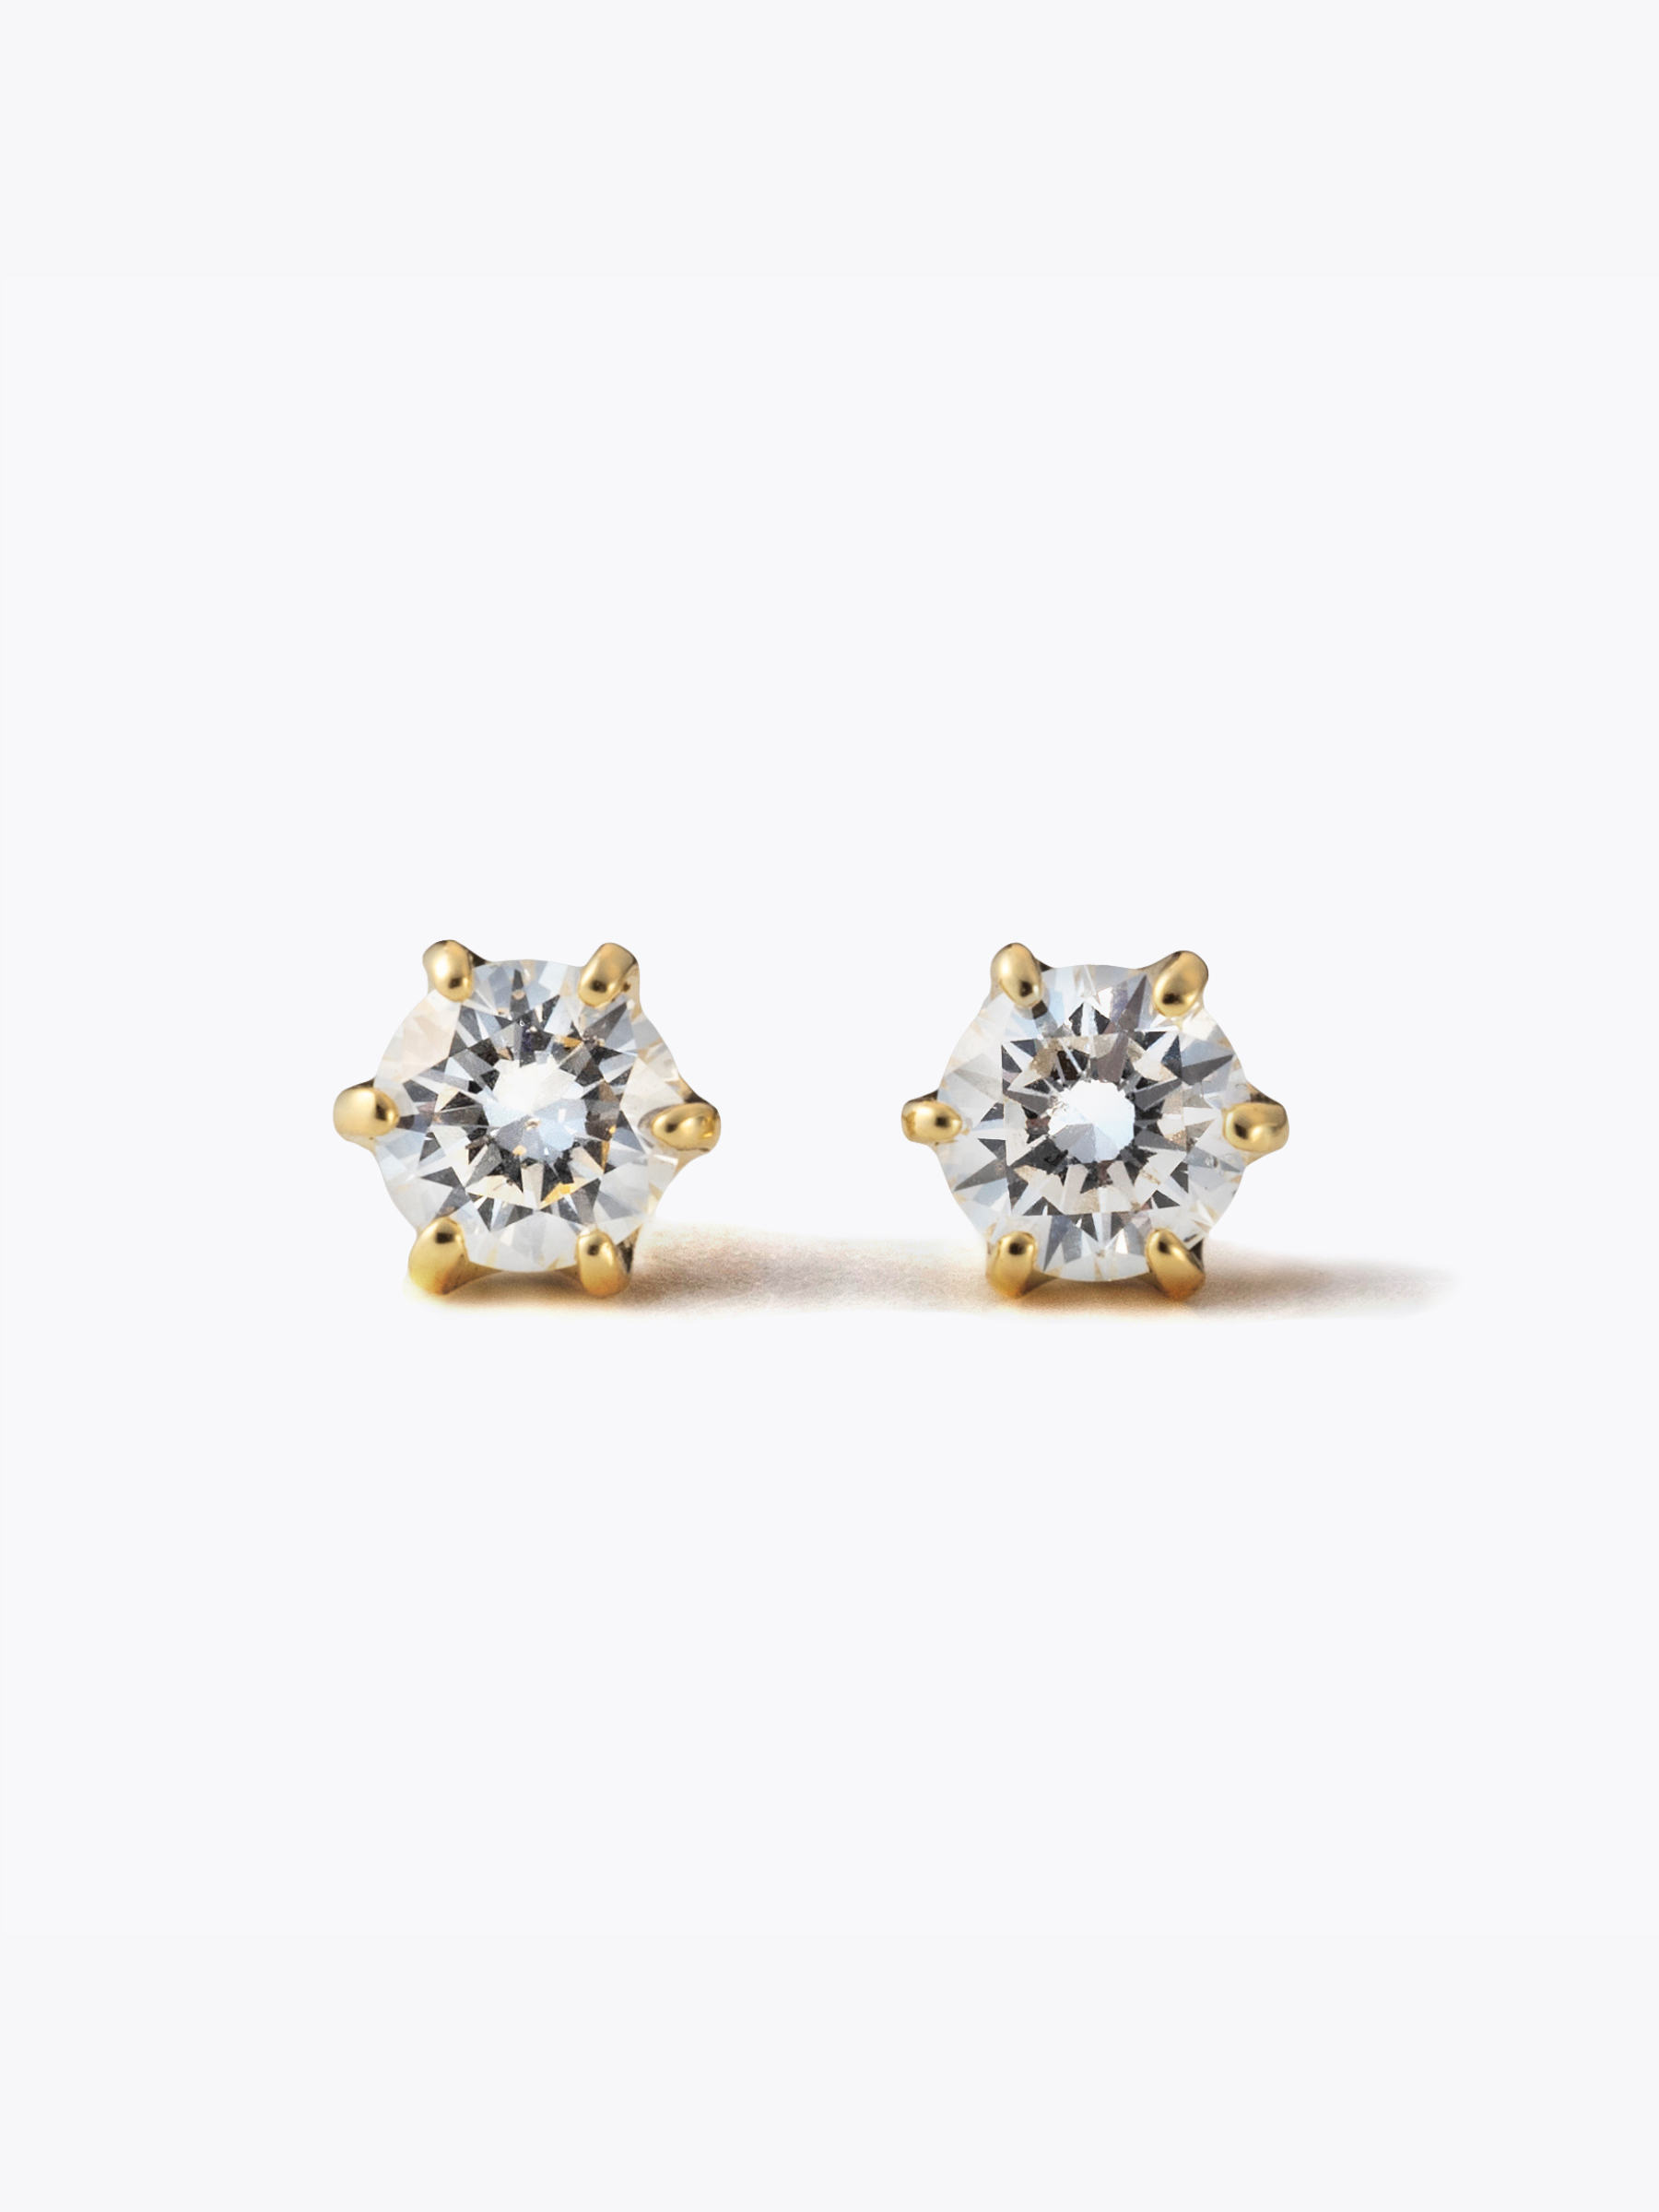 [Lumière] The earrings 0.1ct×2 (total 0.2ct)